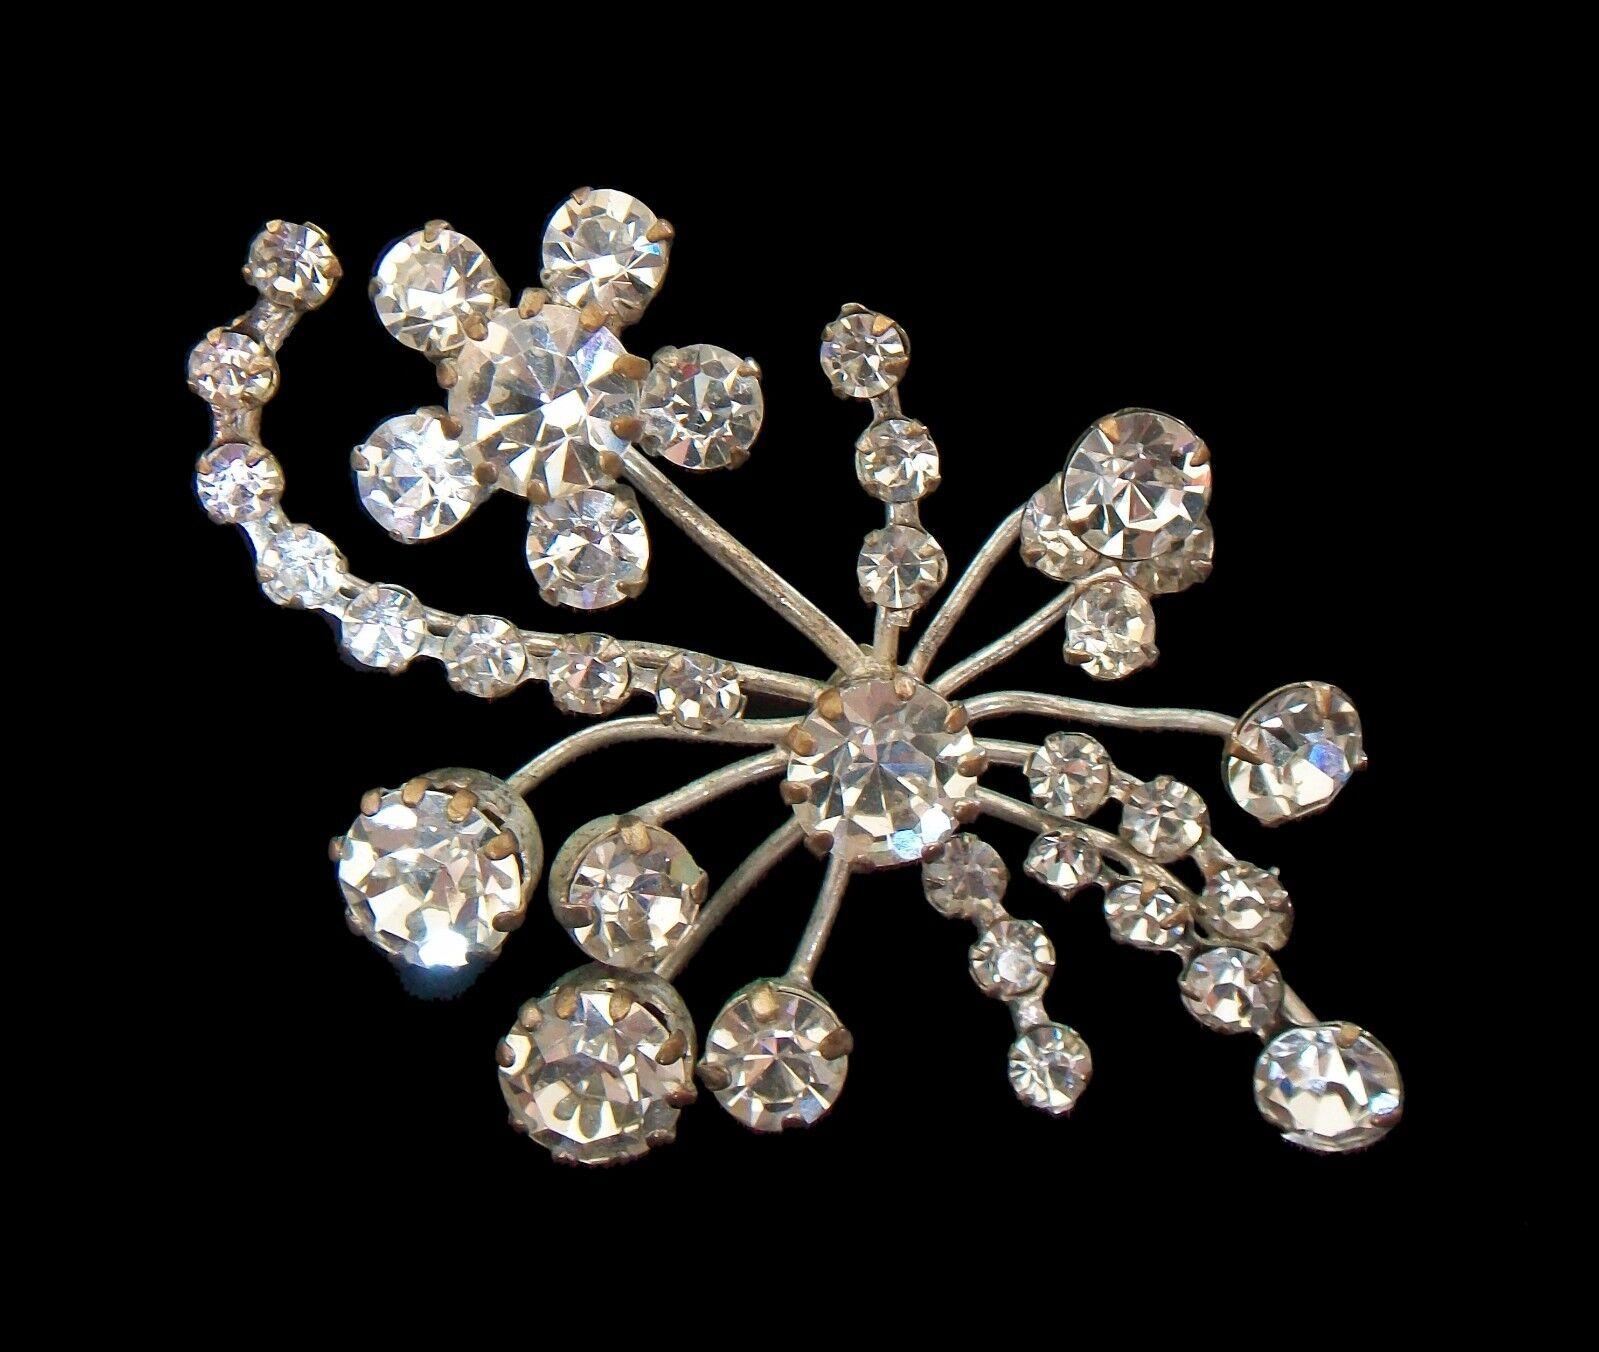 Vintage Austrian crystal rhinestone brooch/pin - fine European quality - graduated sizes of round cut stones - original pin with safety catch - 'MADE IN AUSTRIA' on the back - unsigned - mid 20th century.

Excellent vintage condition - no loss - no